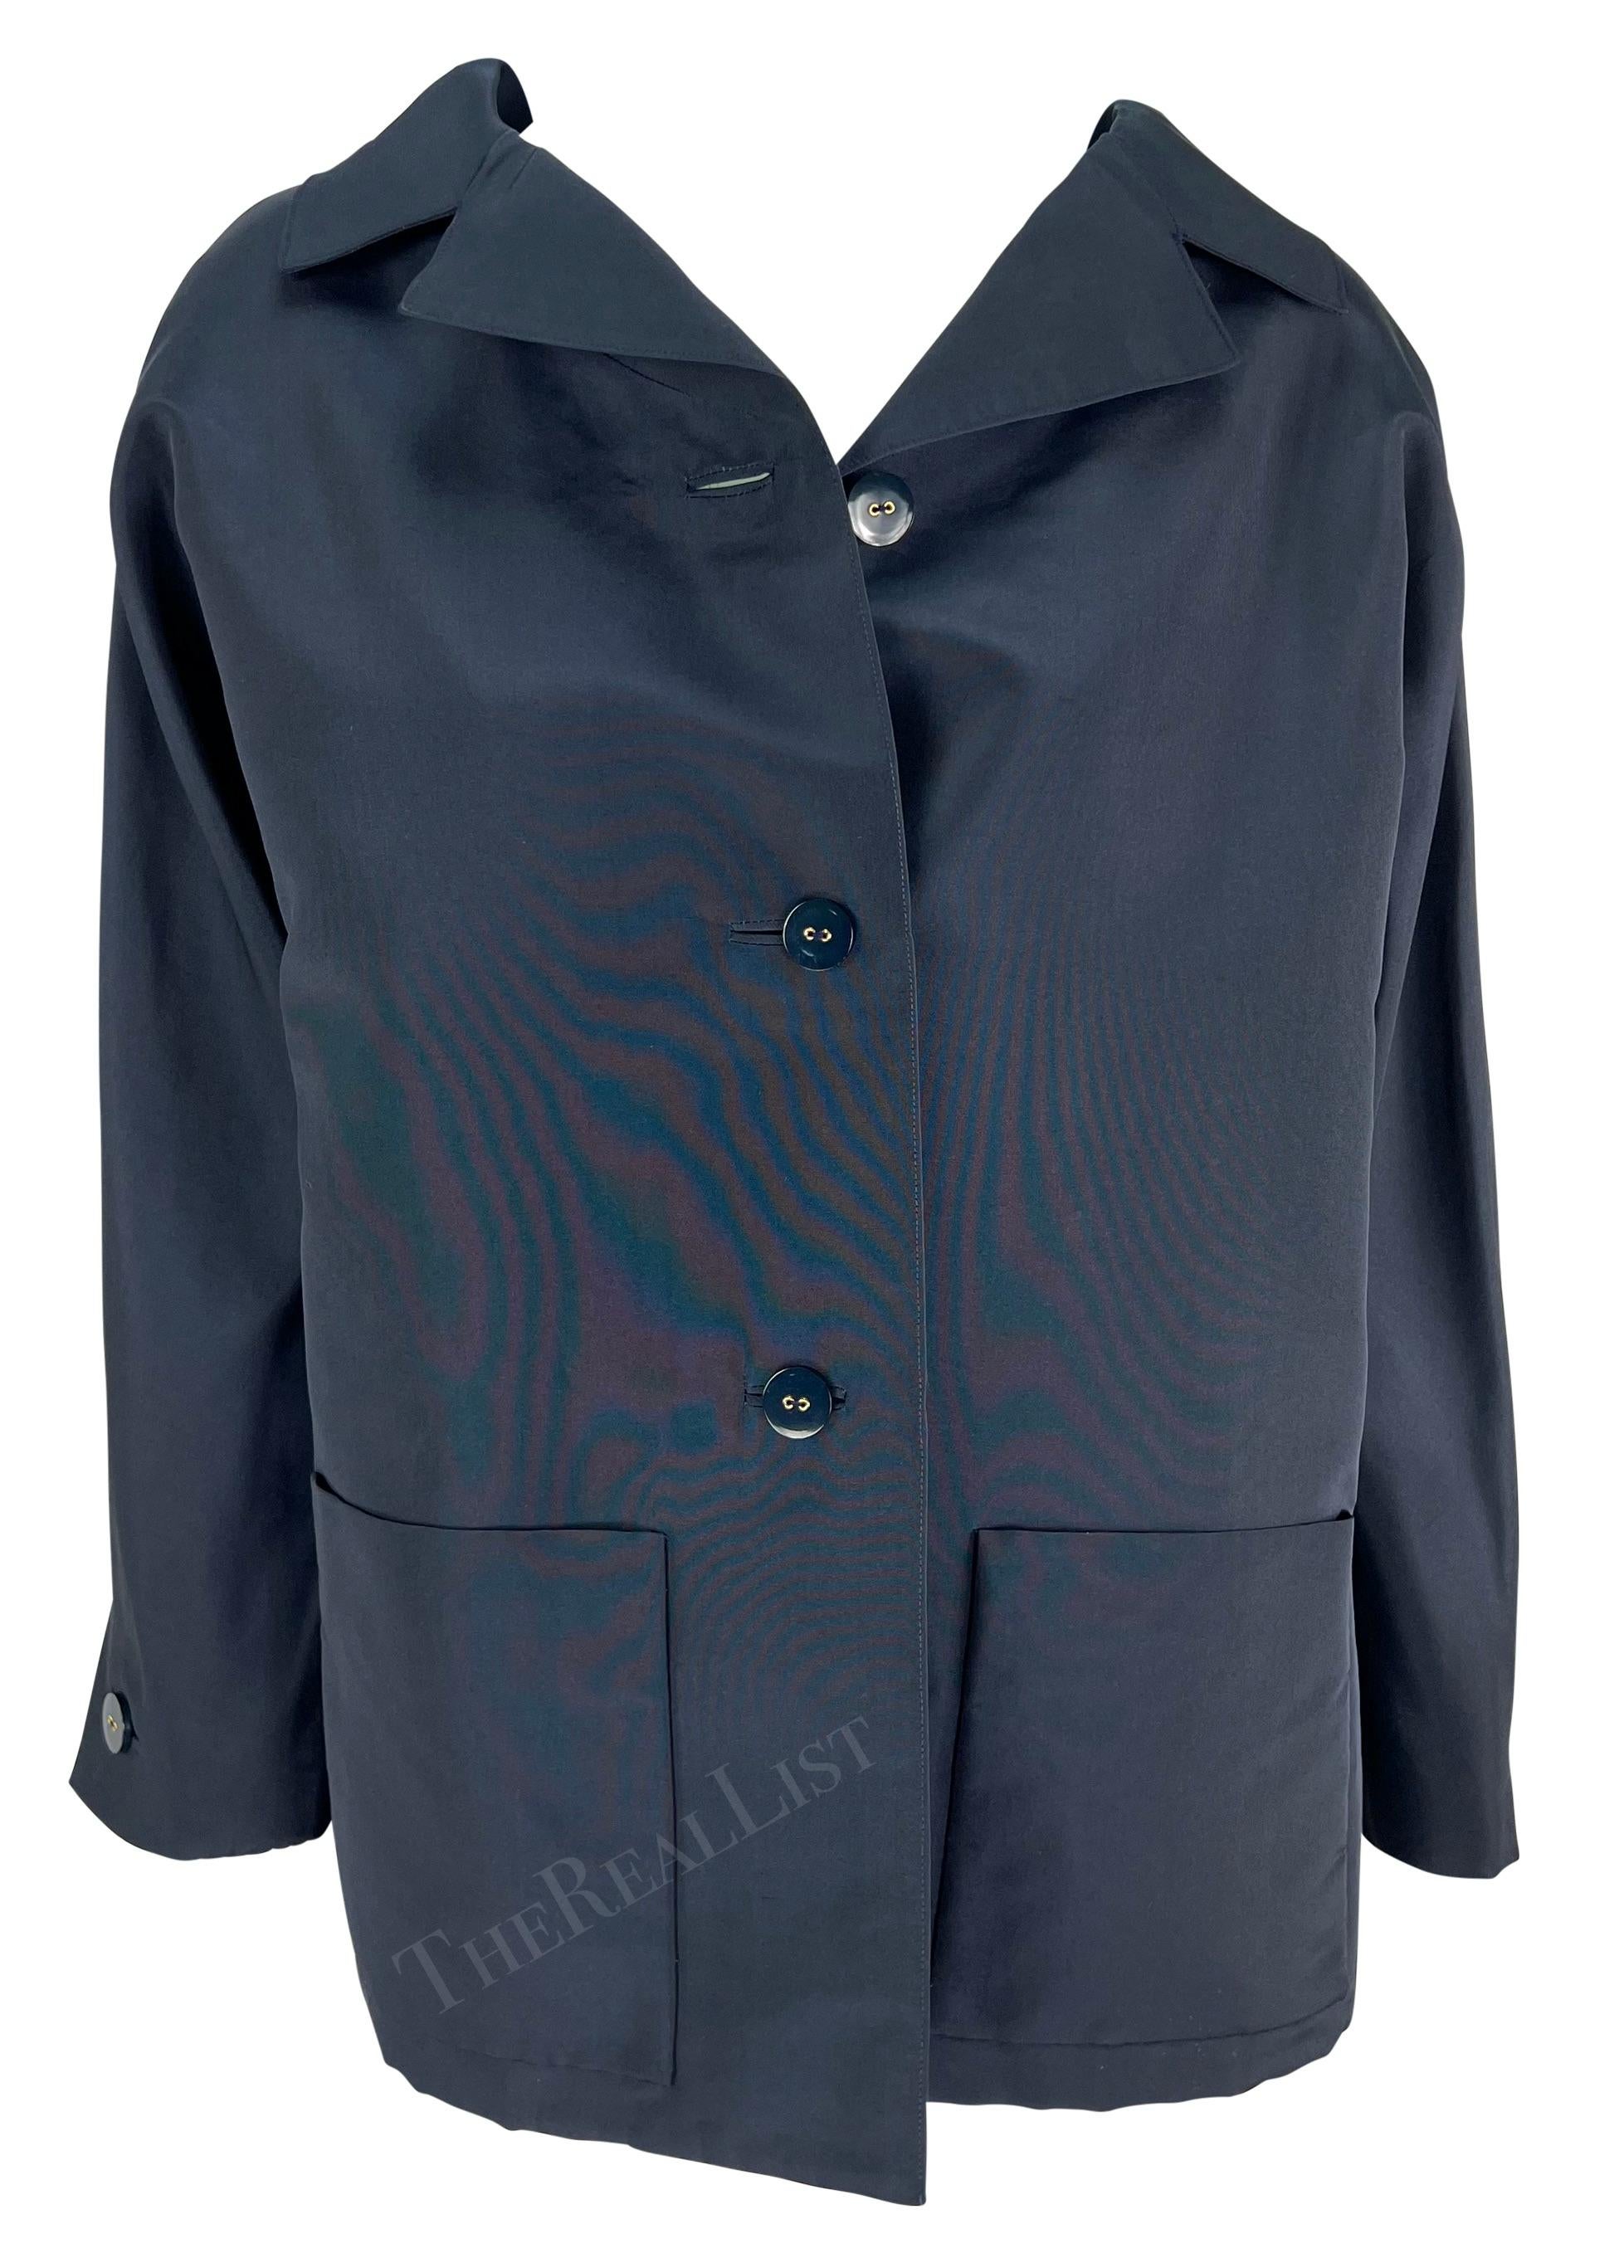 Presenting a fabulous navy blue Pierre Balmain haute couture car coat, designed by Oscar de la Renta. From 2000, this custom handmade coat features a fold-over collar, button-down closure, and pockets at the hips. This oversized car coat is expertly